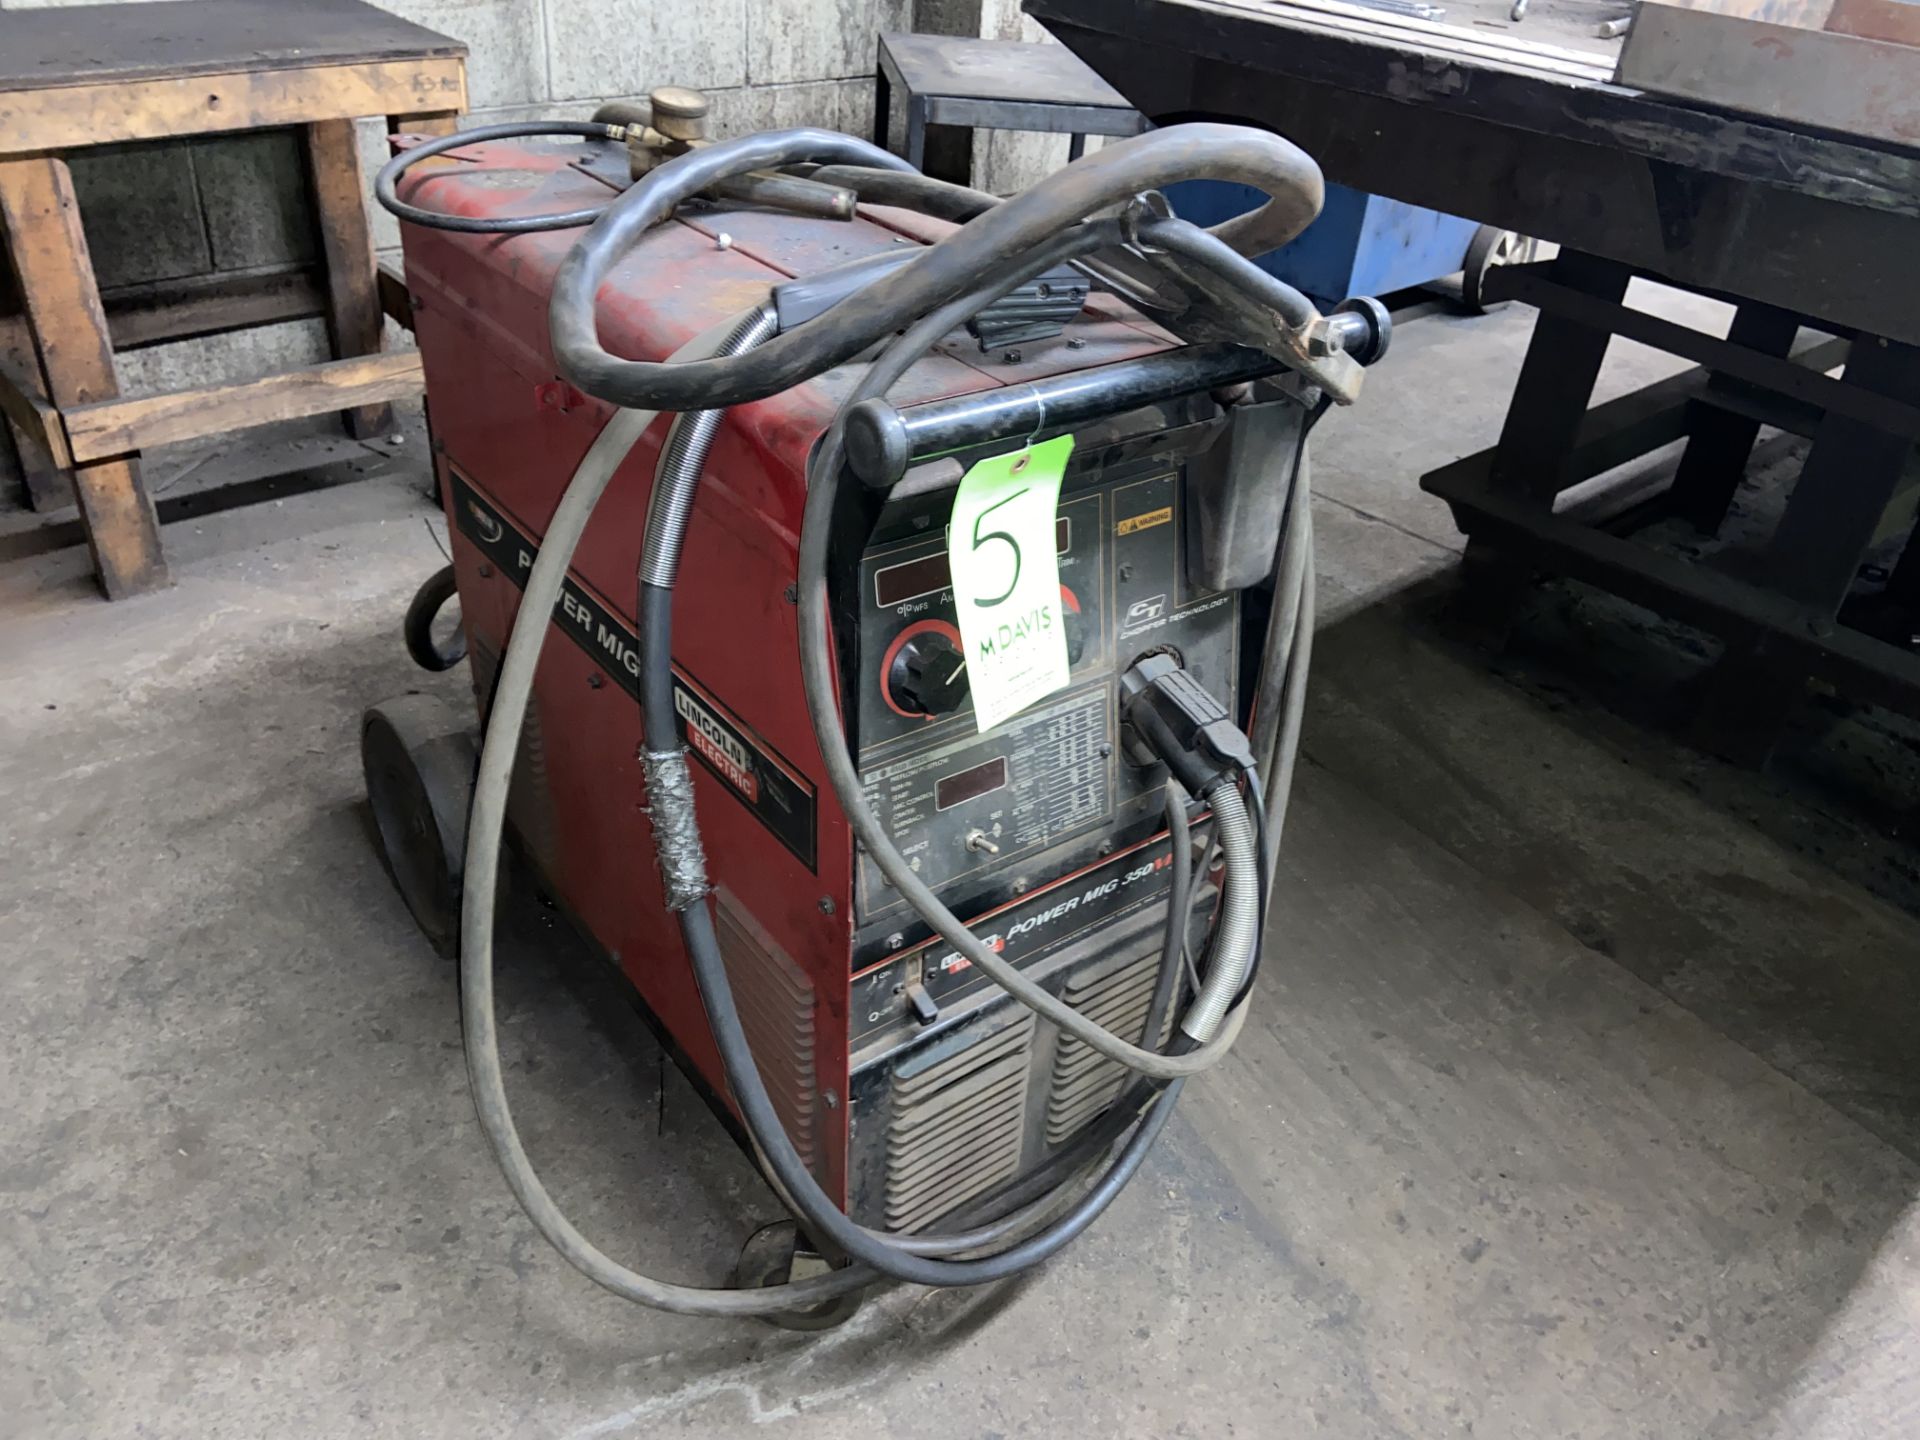 Lincoln Electric Power Mig 350MP Welder, S/N K2403-1 11147 U1070703714, Mounted on Portable Frame